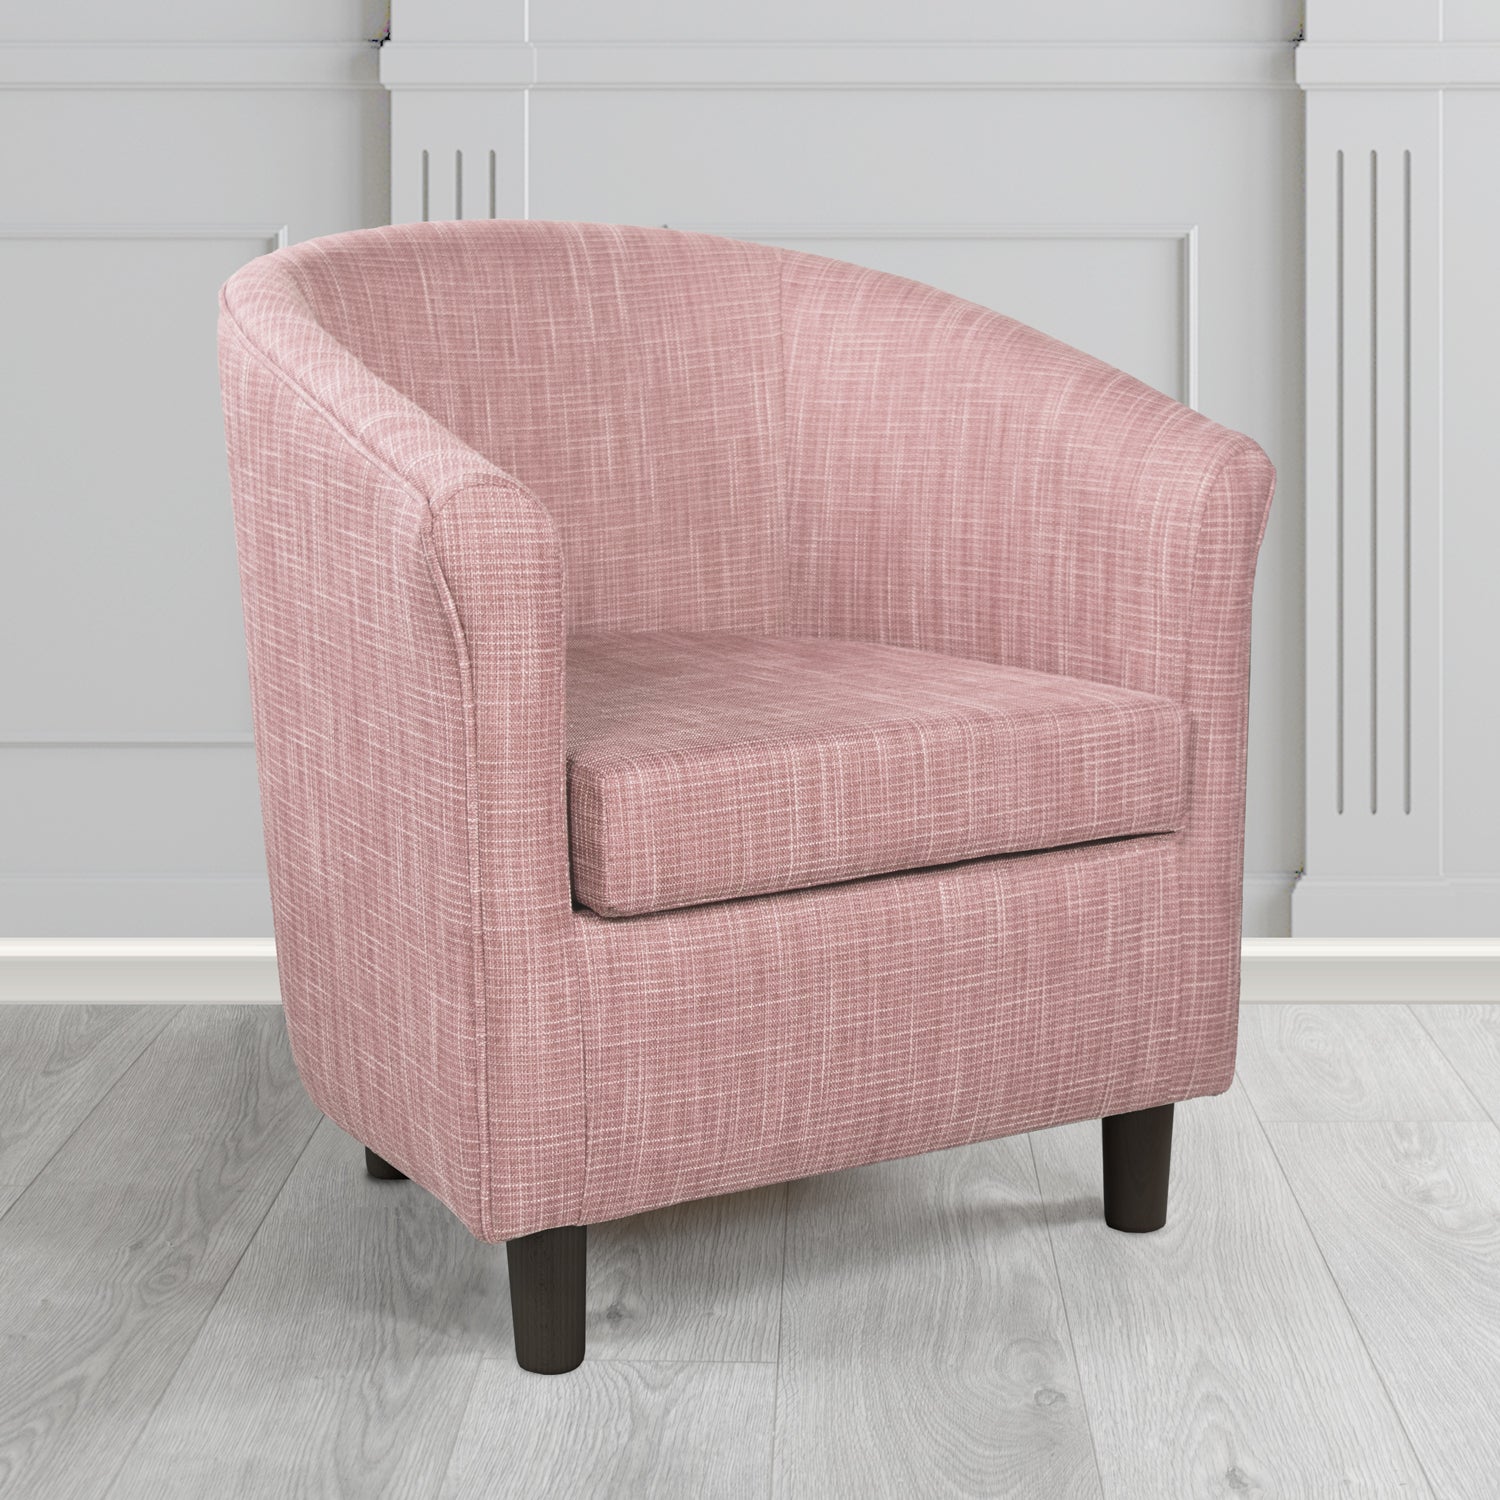 Tuscany Ravel Babe Contract Crib 5 Fabric Tub Chair - Antimicrobial & Water-Resistant - The Tub Chair Shop